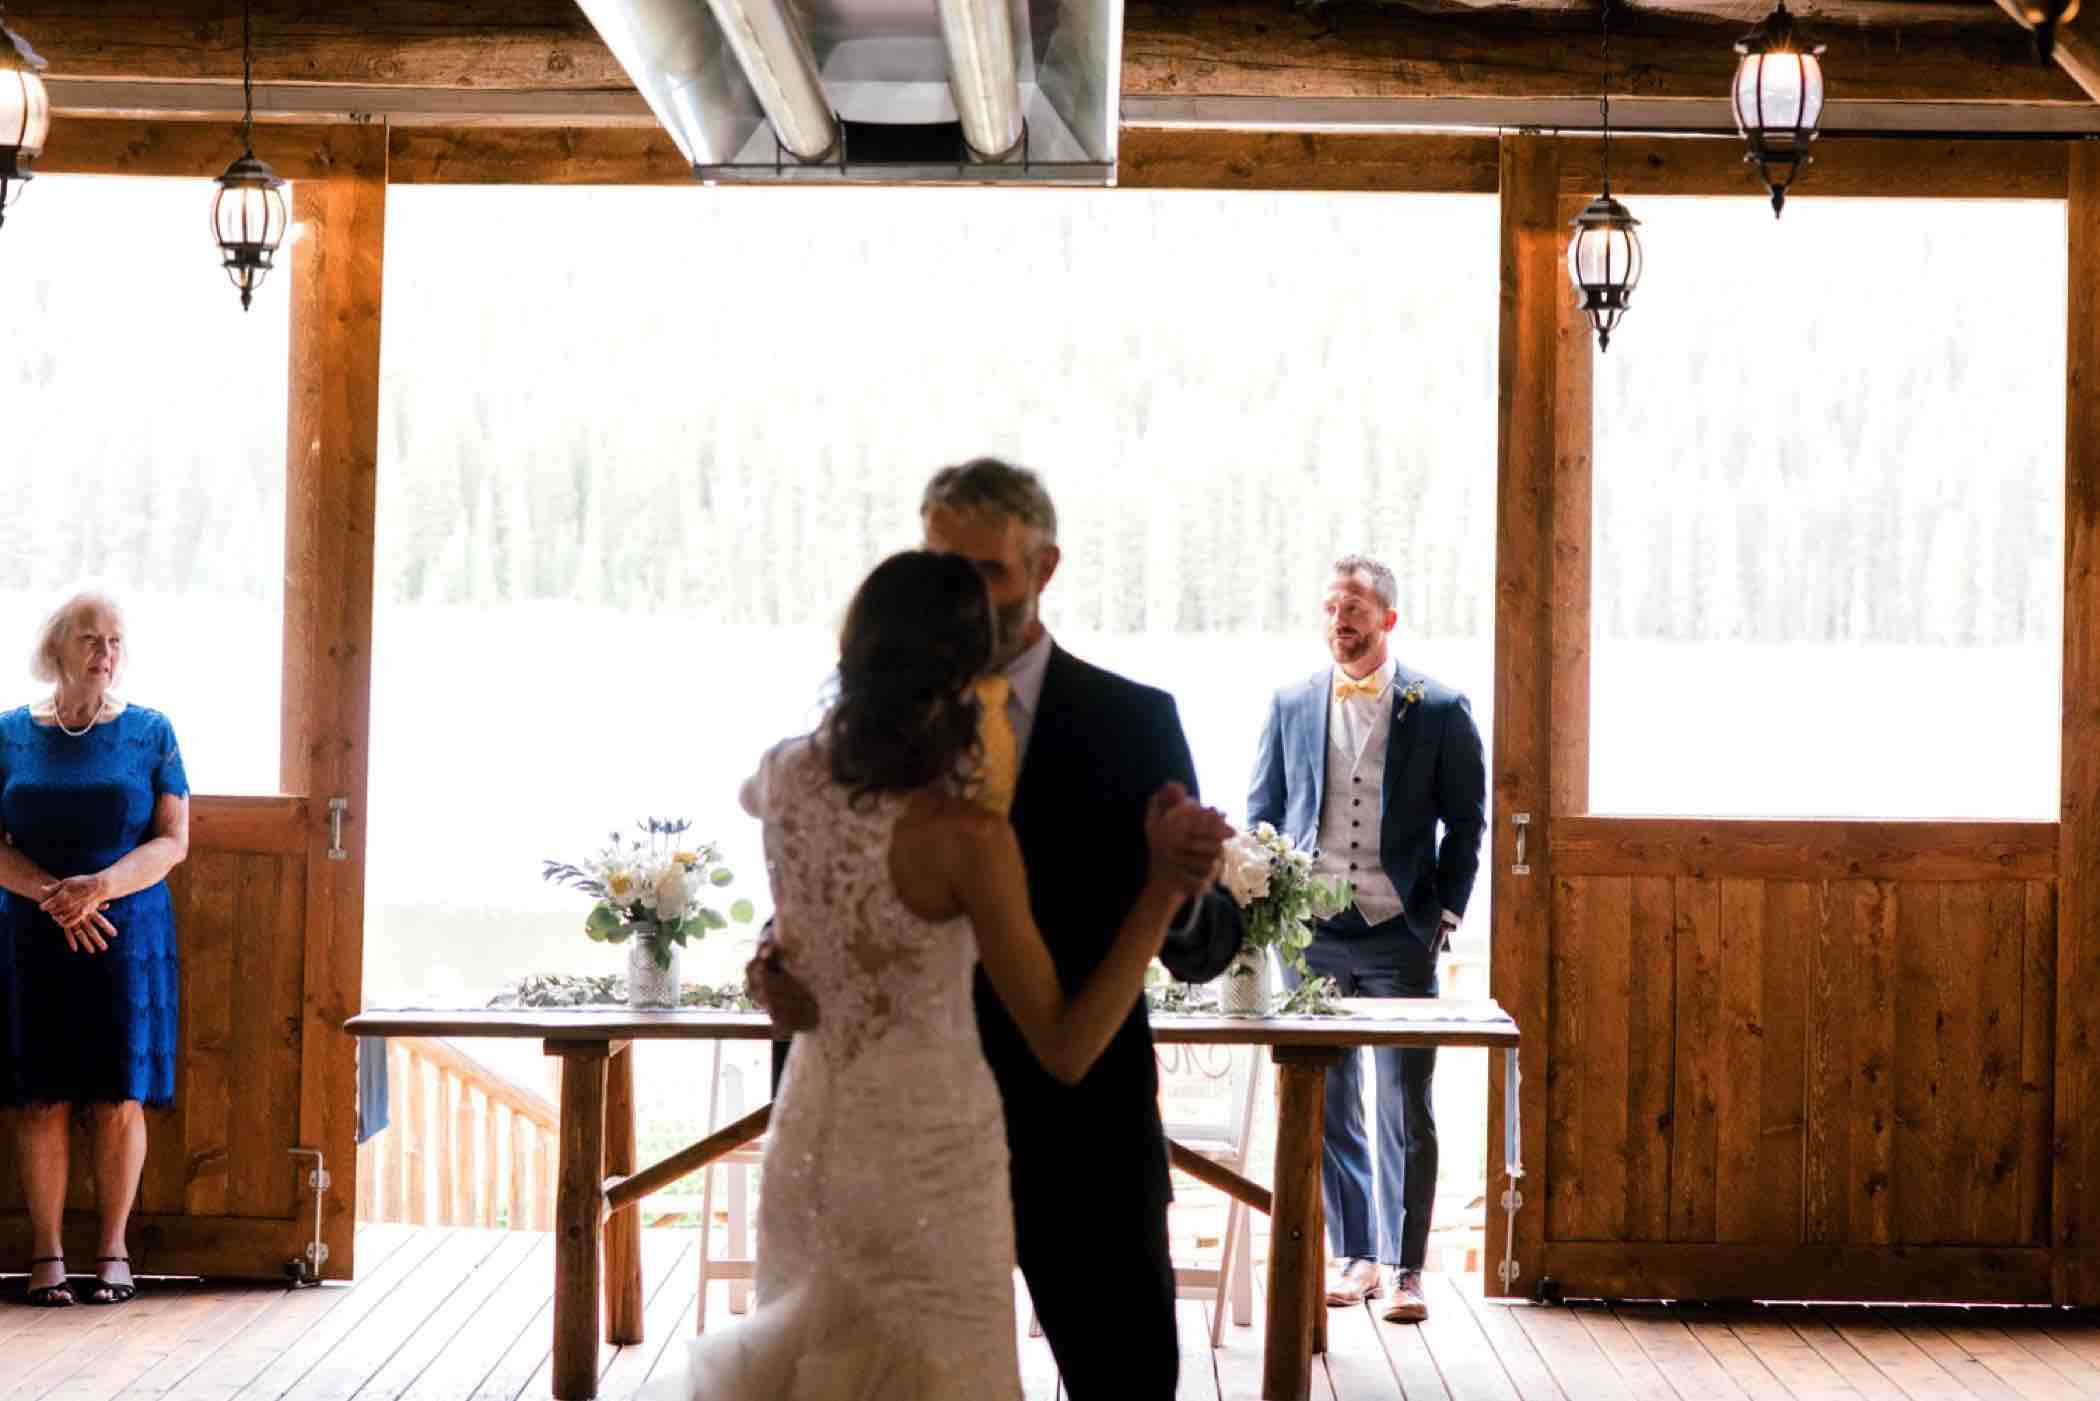 The groom looks on during the father daughter dance at Piney River Ranch in Vail, Colorado. Photo by Ali and Garrett, Romantic, Adventurous, Nostalgic Wedding Photographers.